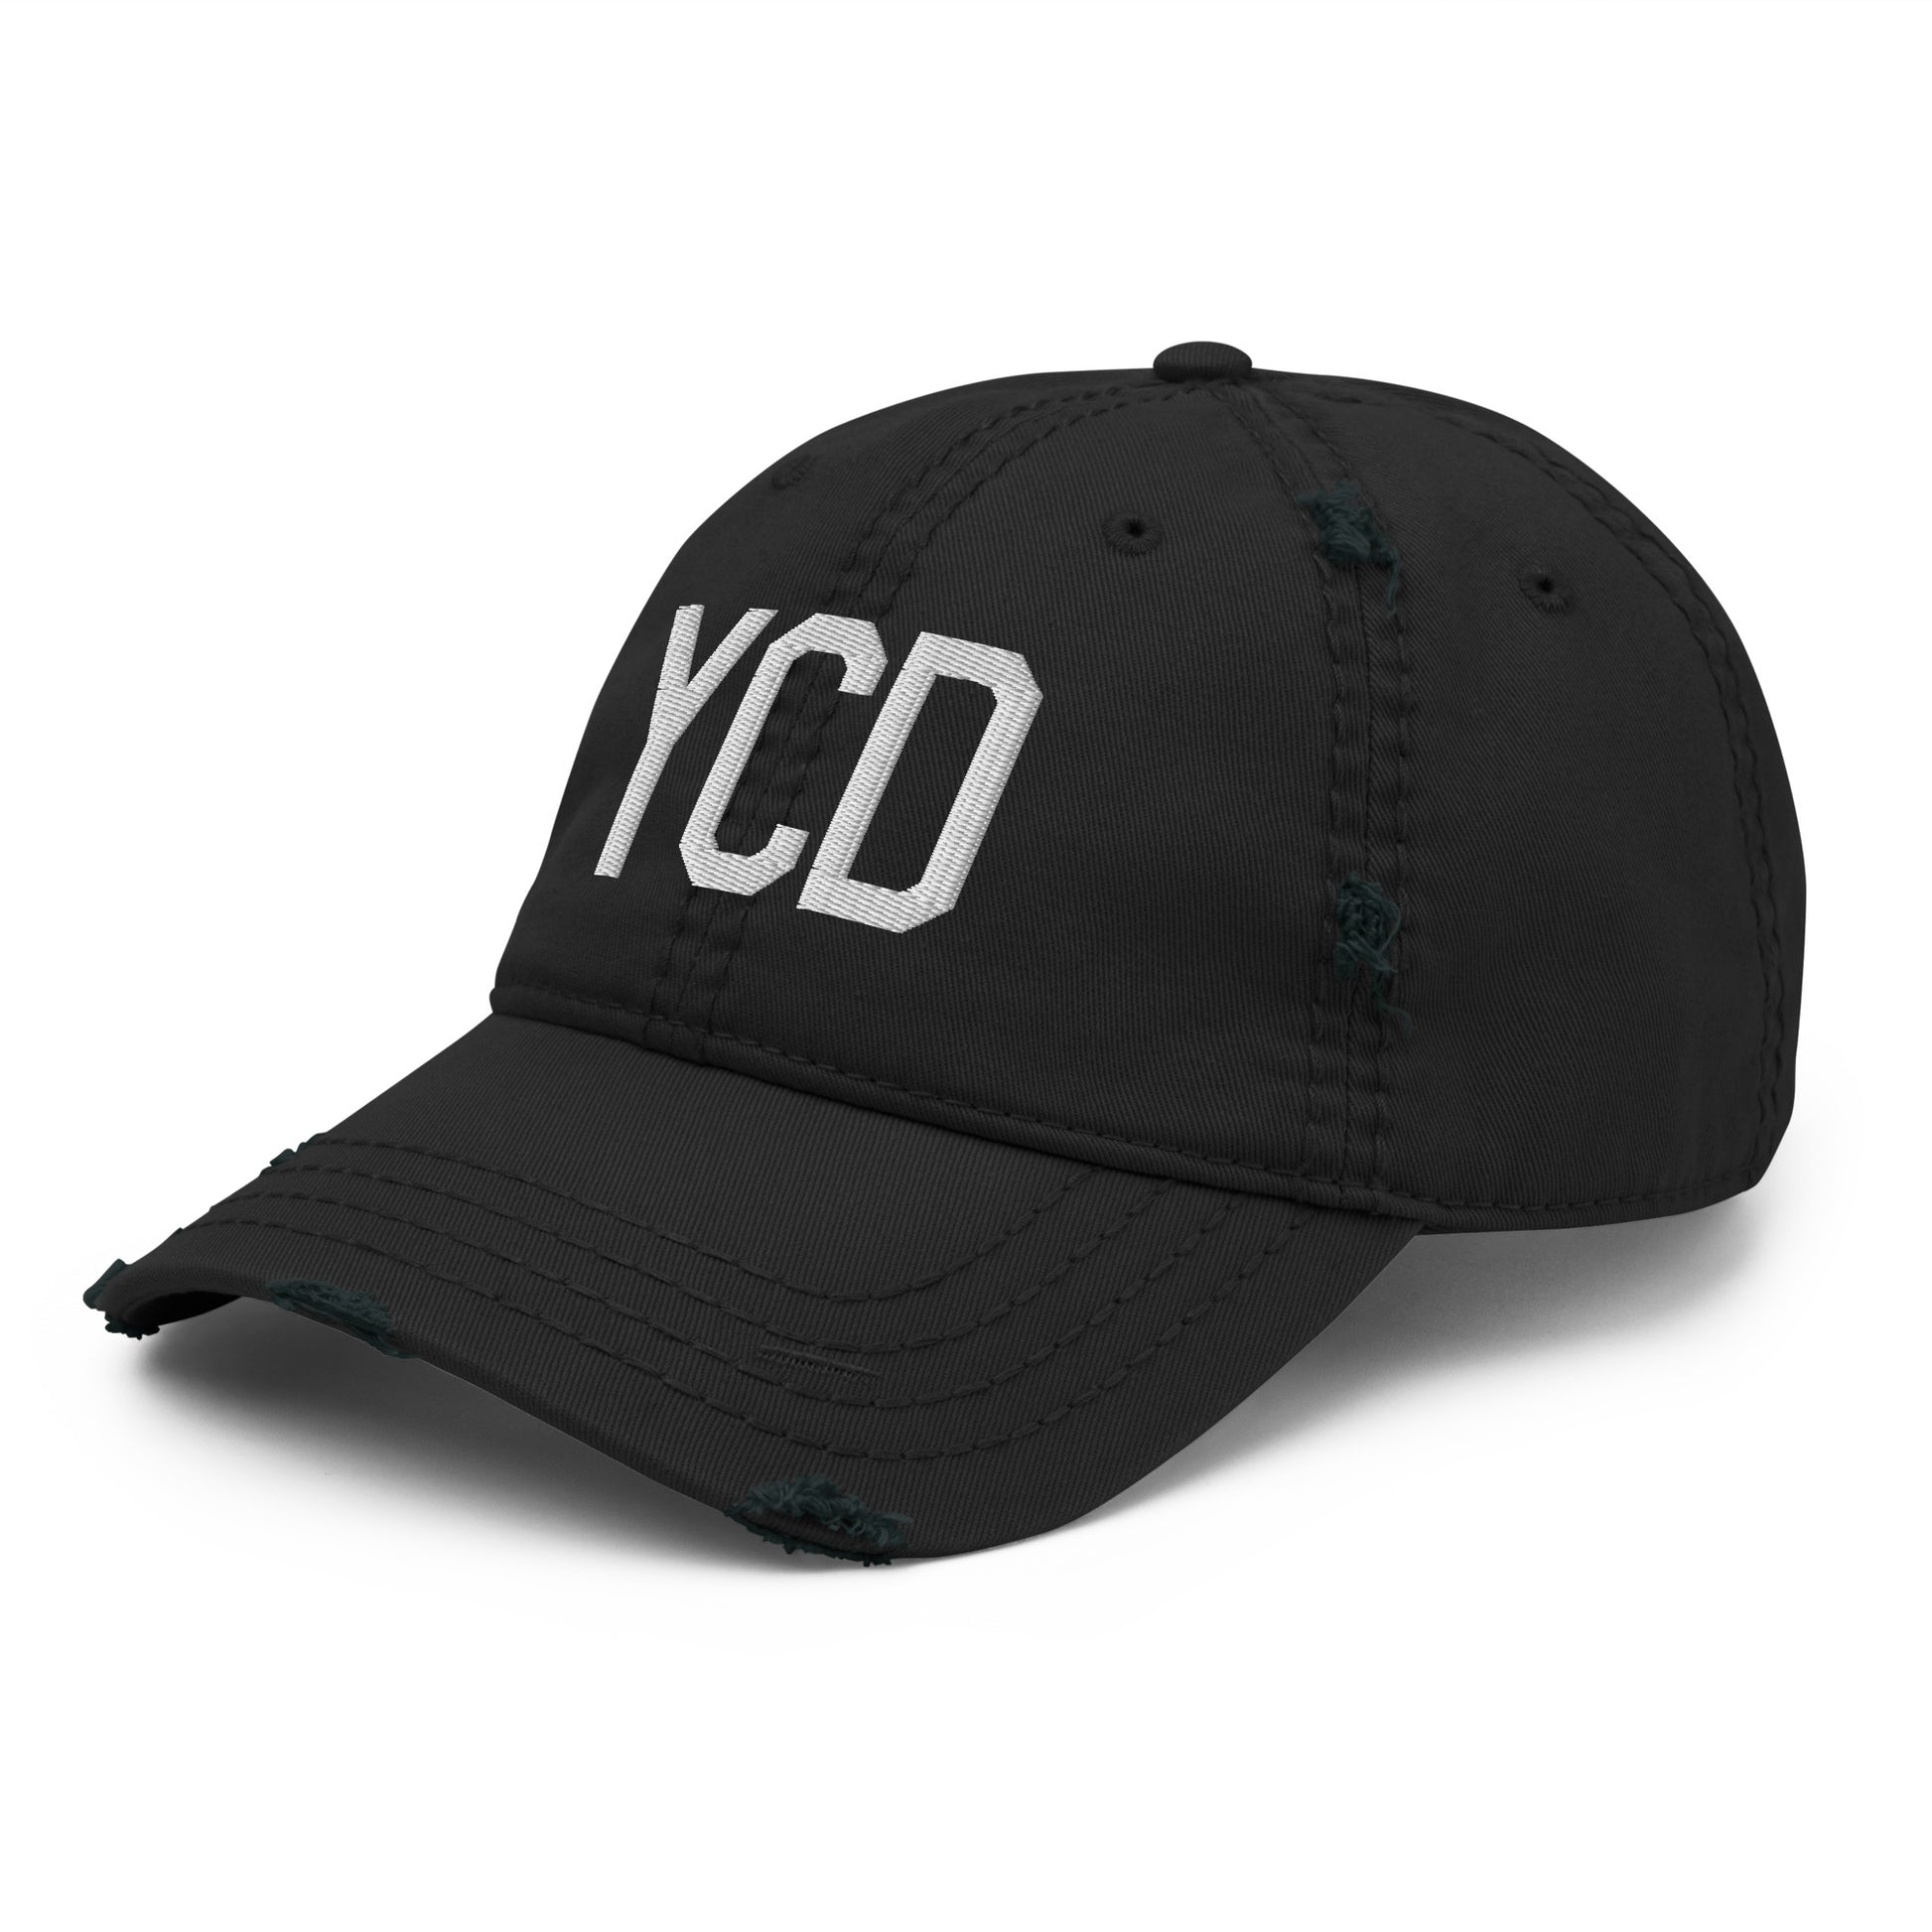 Airport Code Distressed Hat - White • YCD Nanaimo • YHM Designs - Image 11